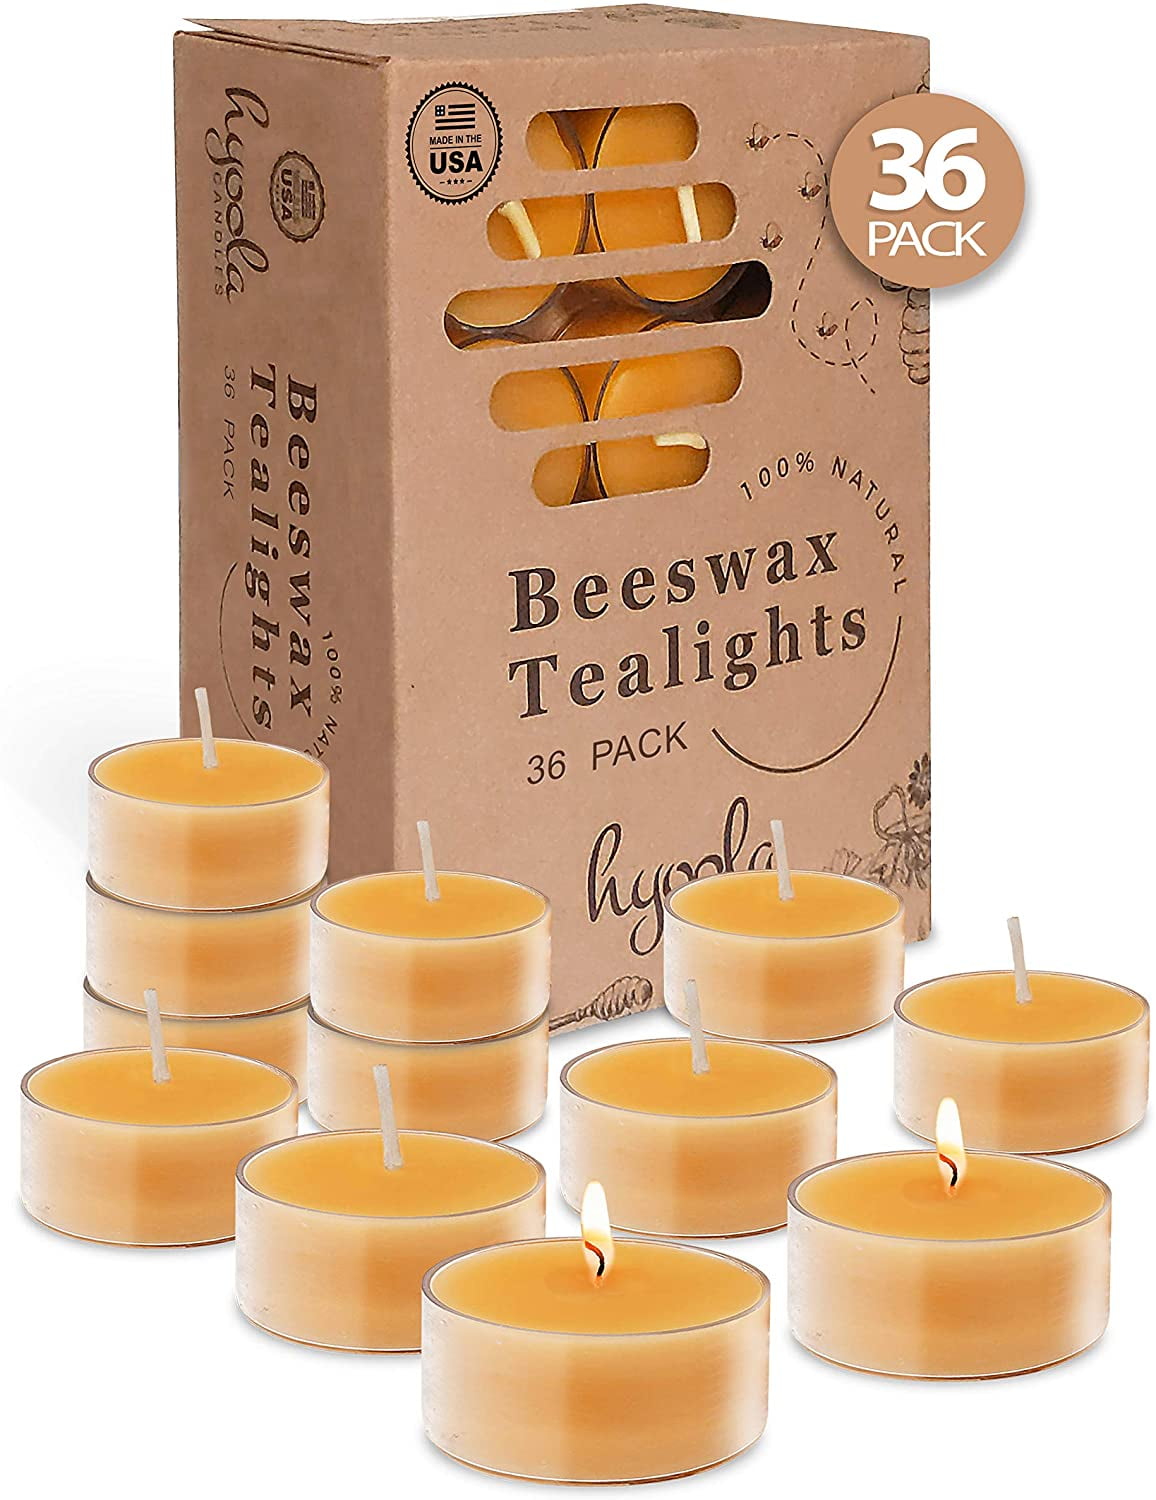 Votive Candles 15 Hour 6 Natural Honey Scented 100 Percent  Beeswax Votives 